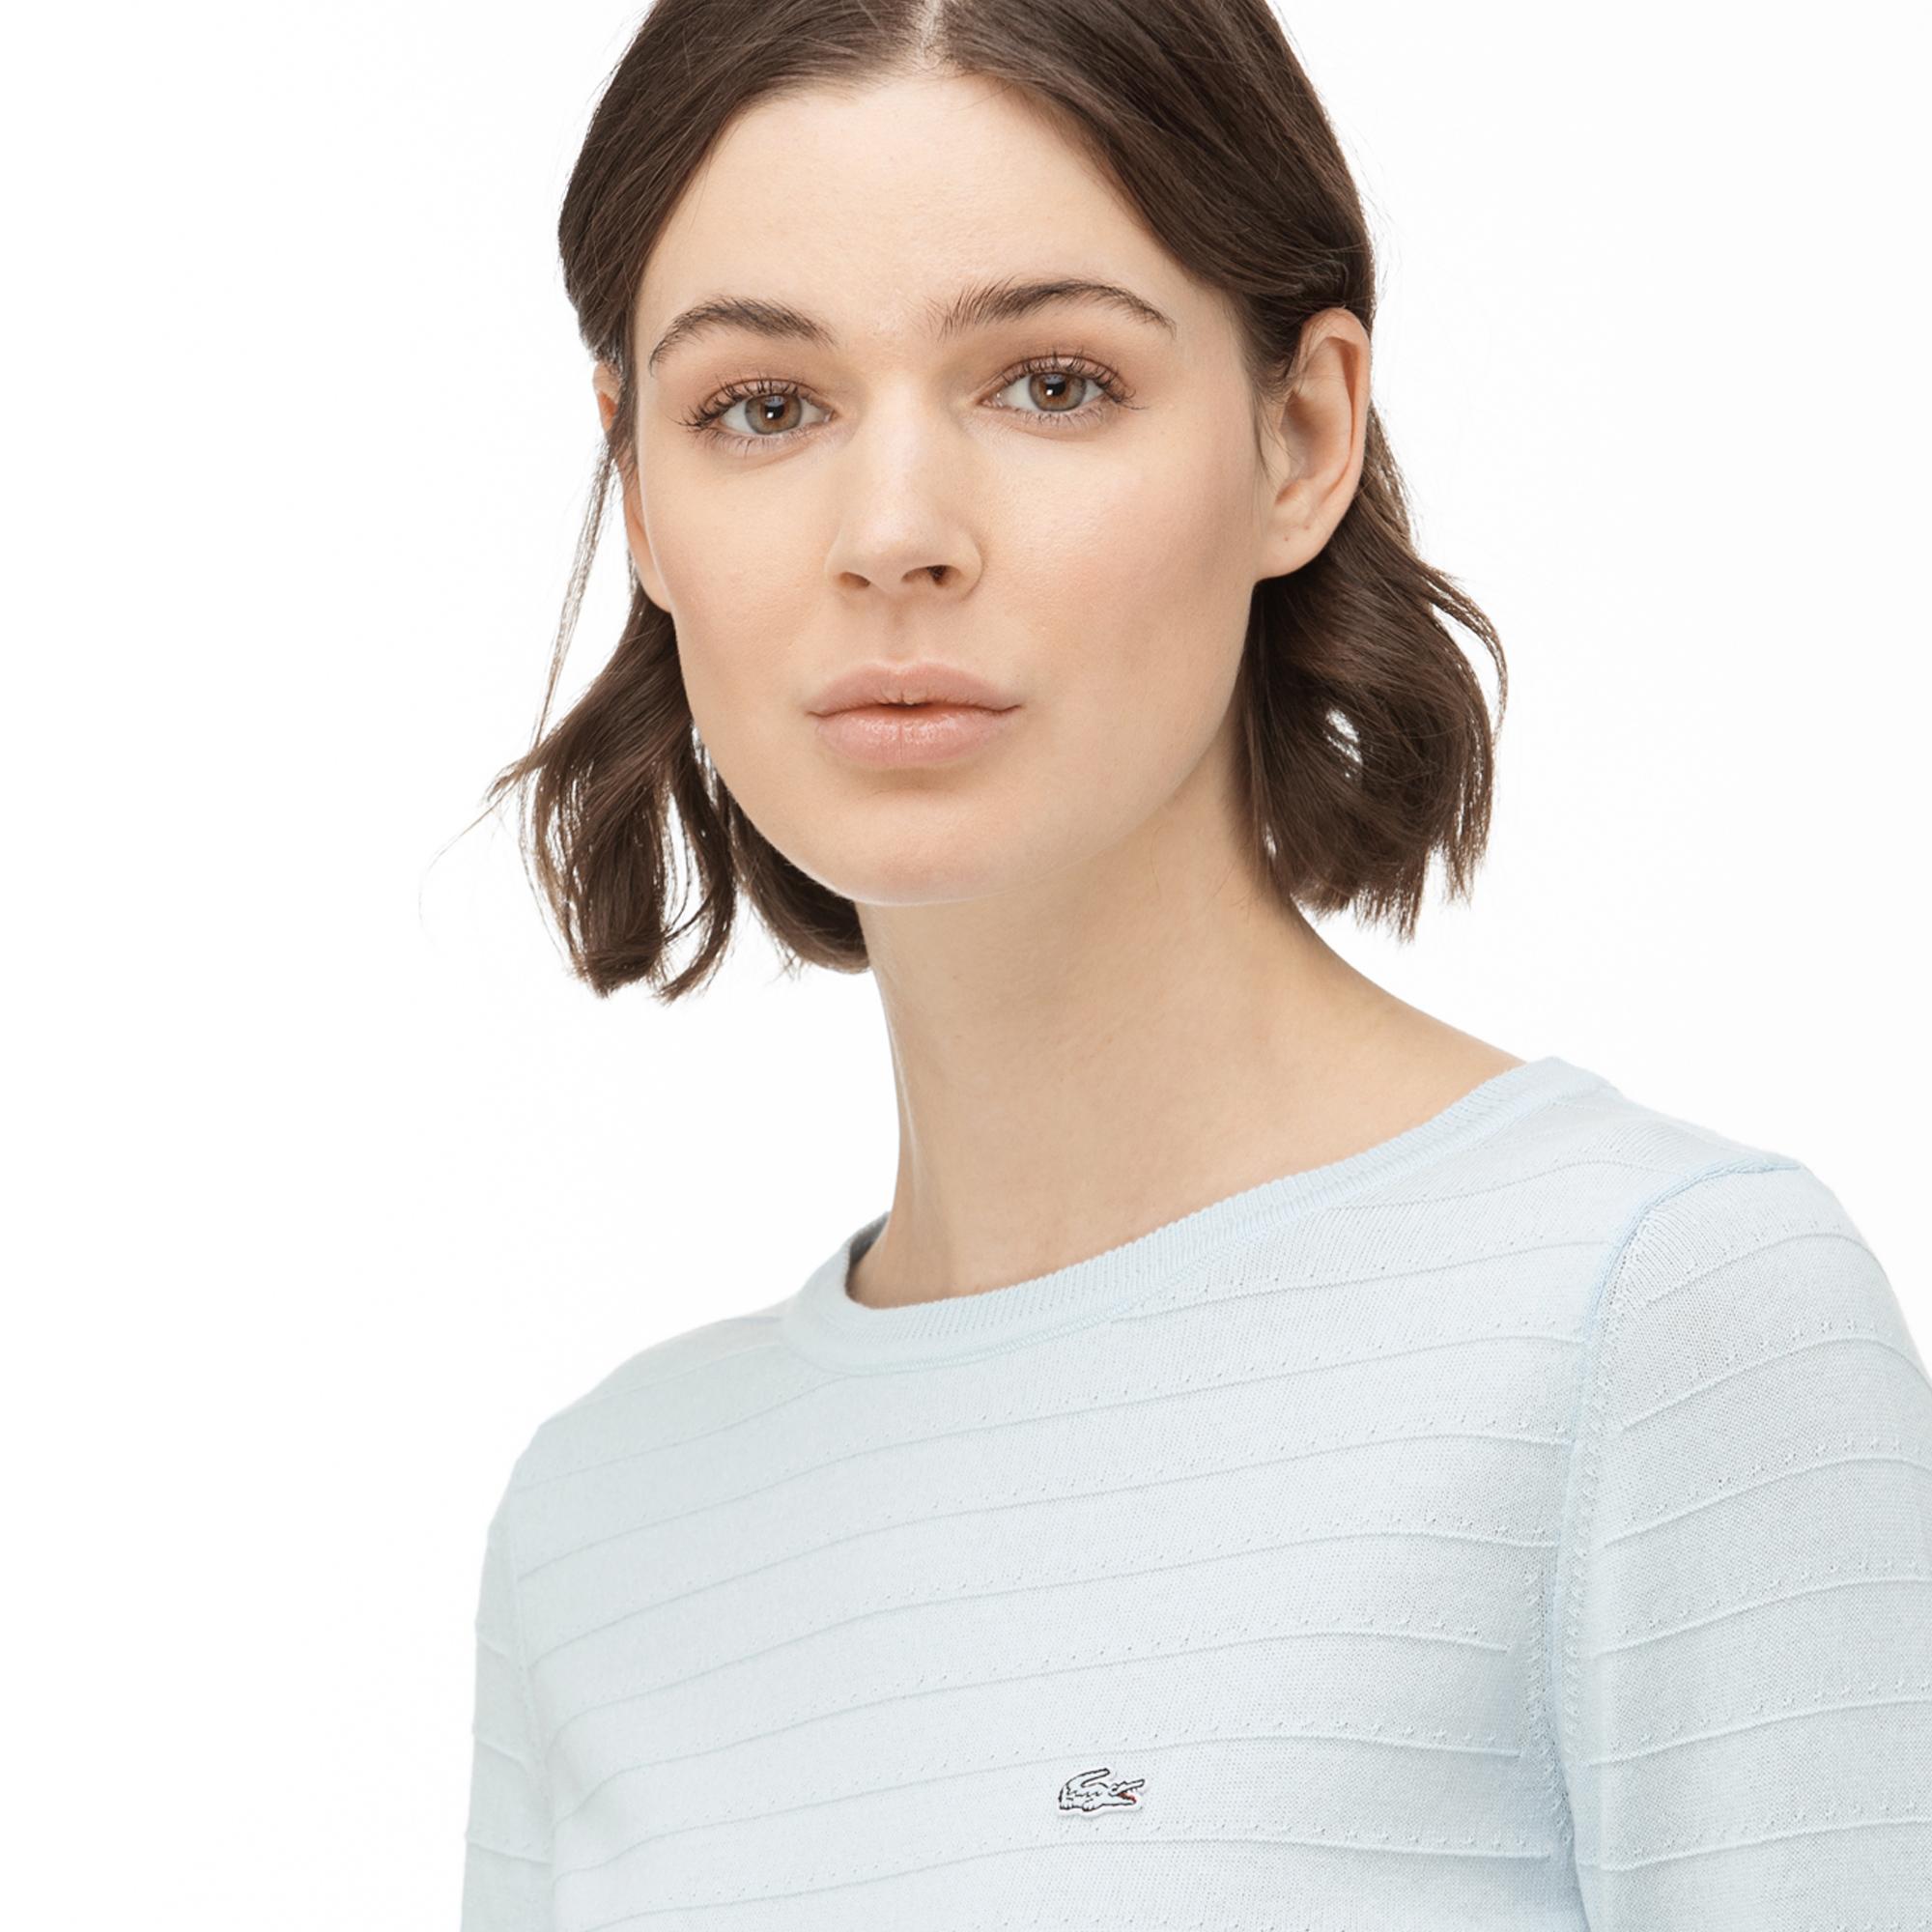 Lacoste Women's Round Neck Patterned Tricot Sweater